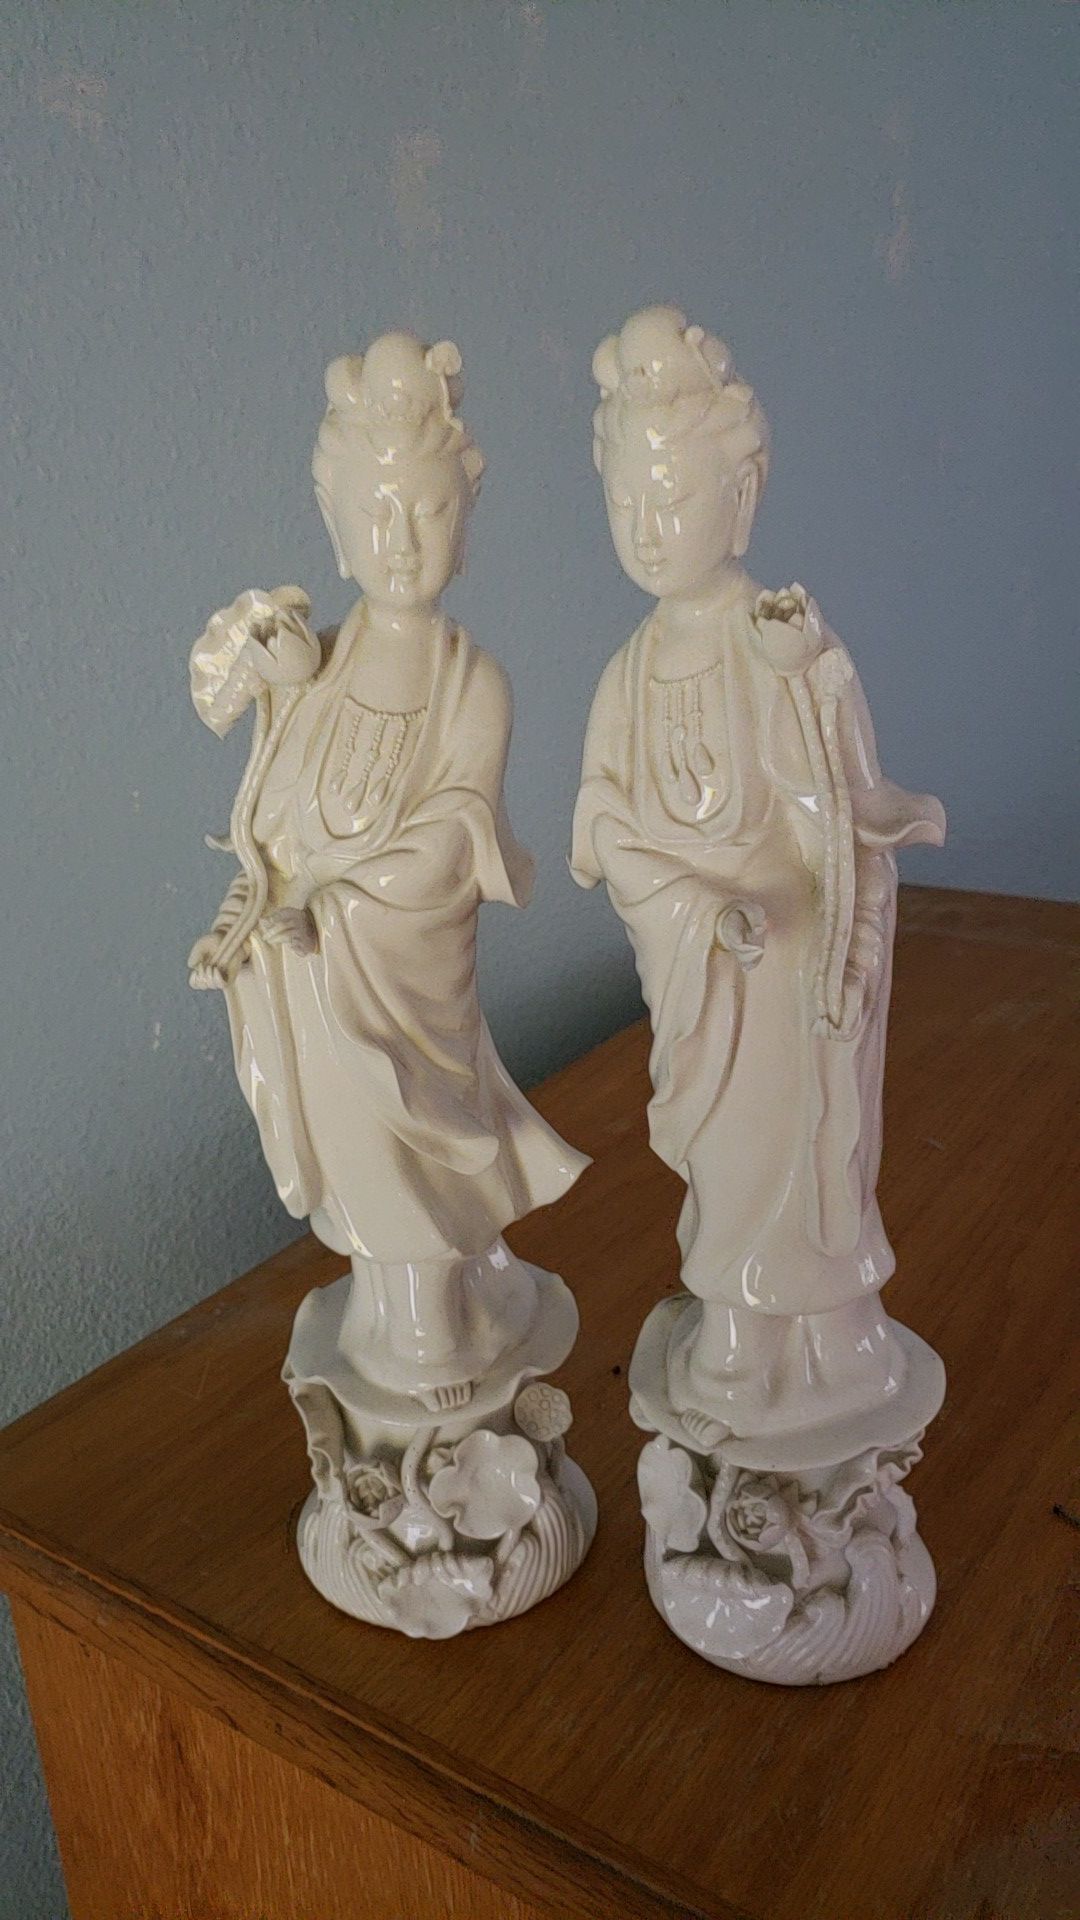 Collectible porcelain Japanese statues